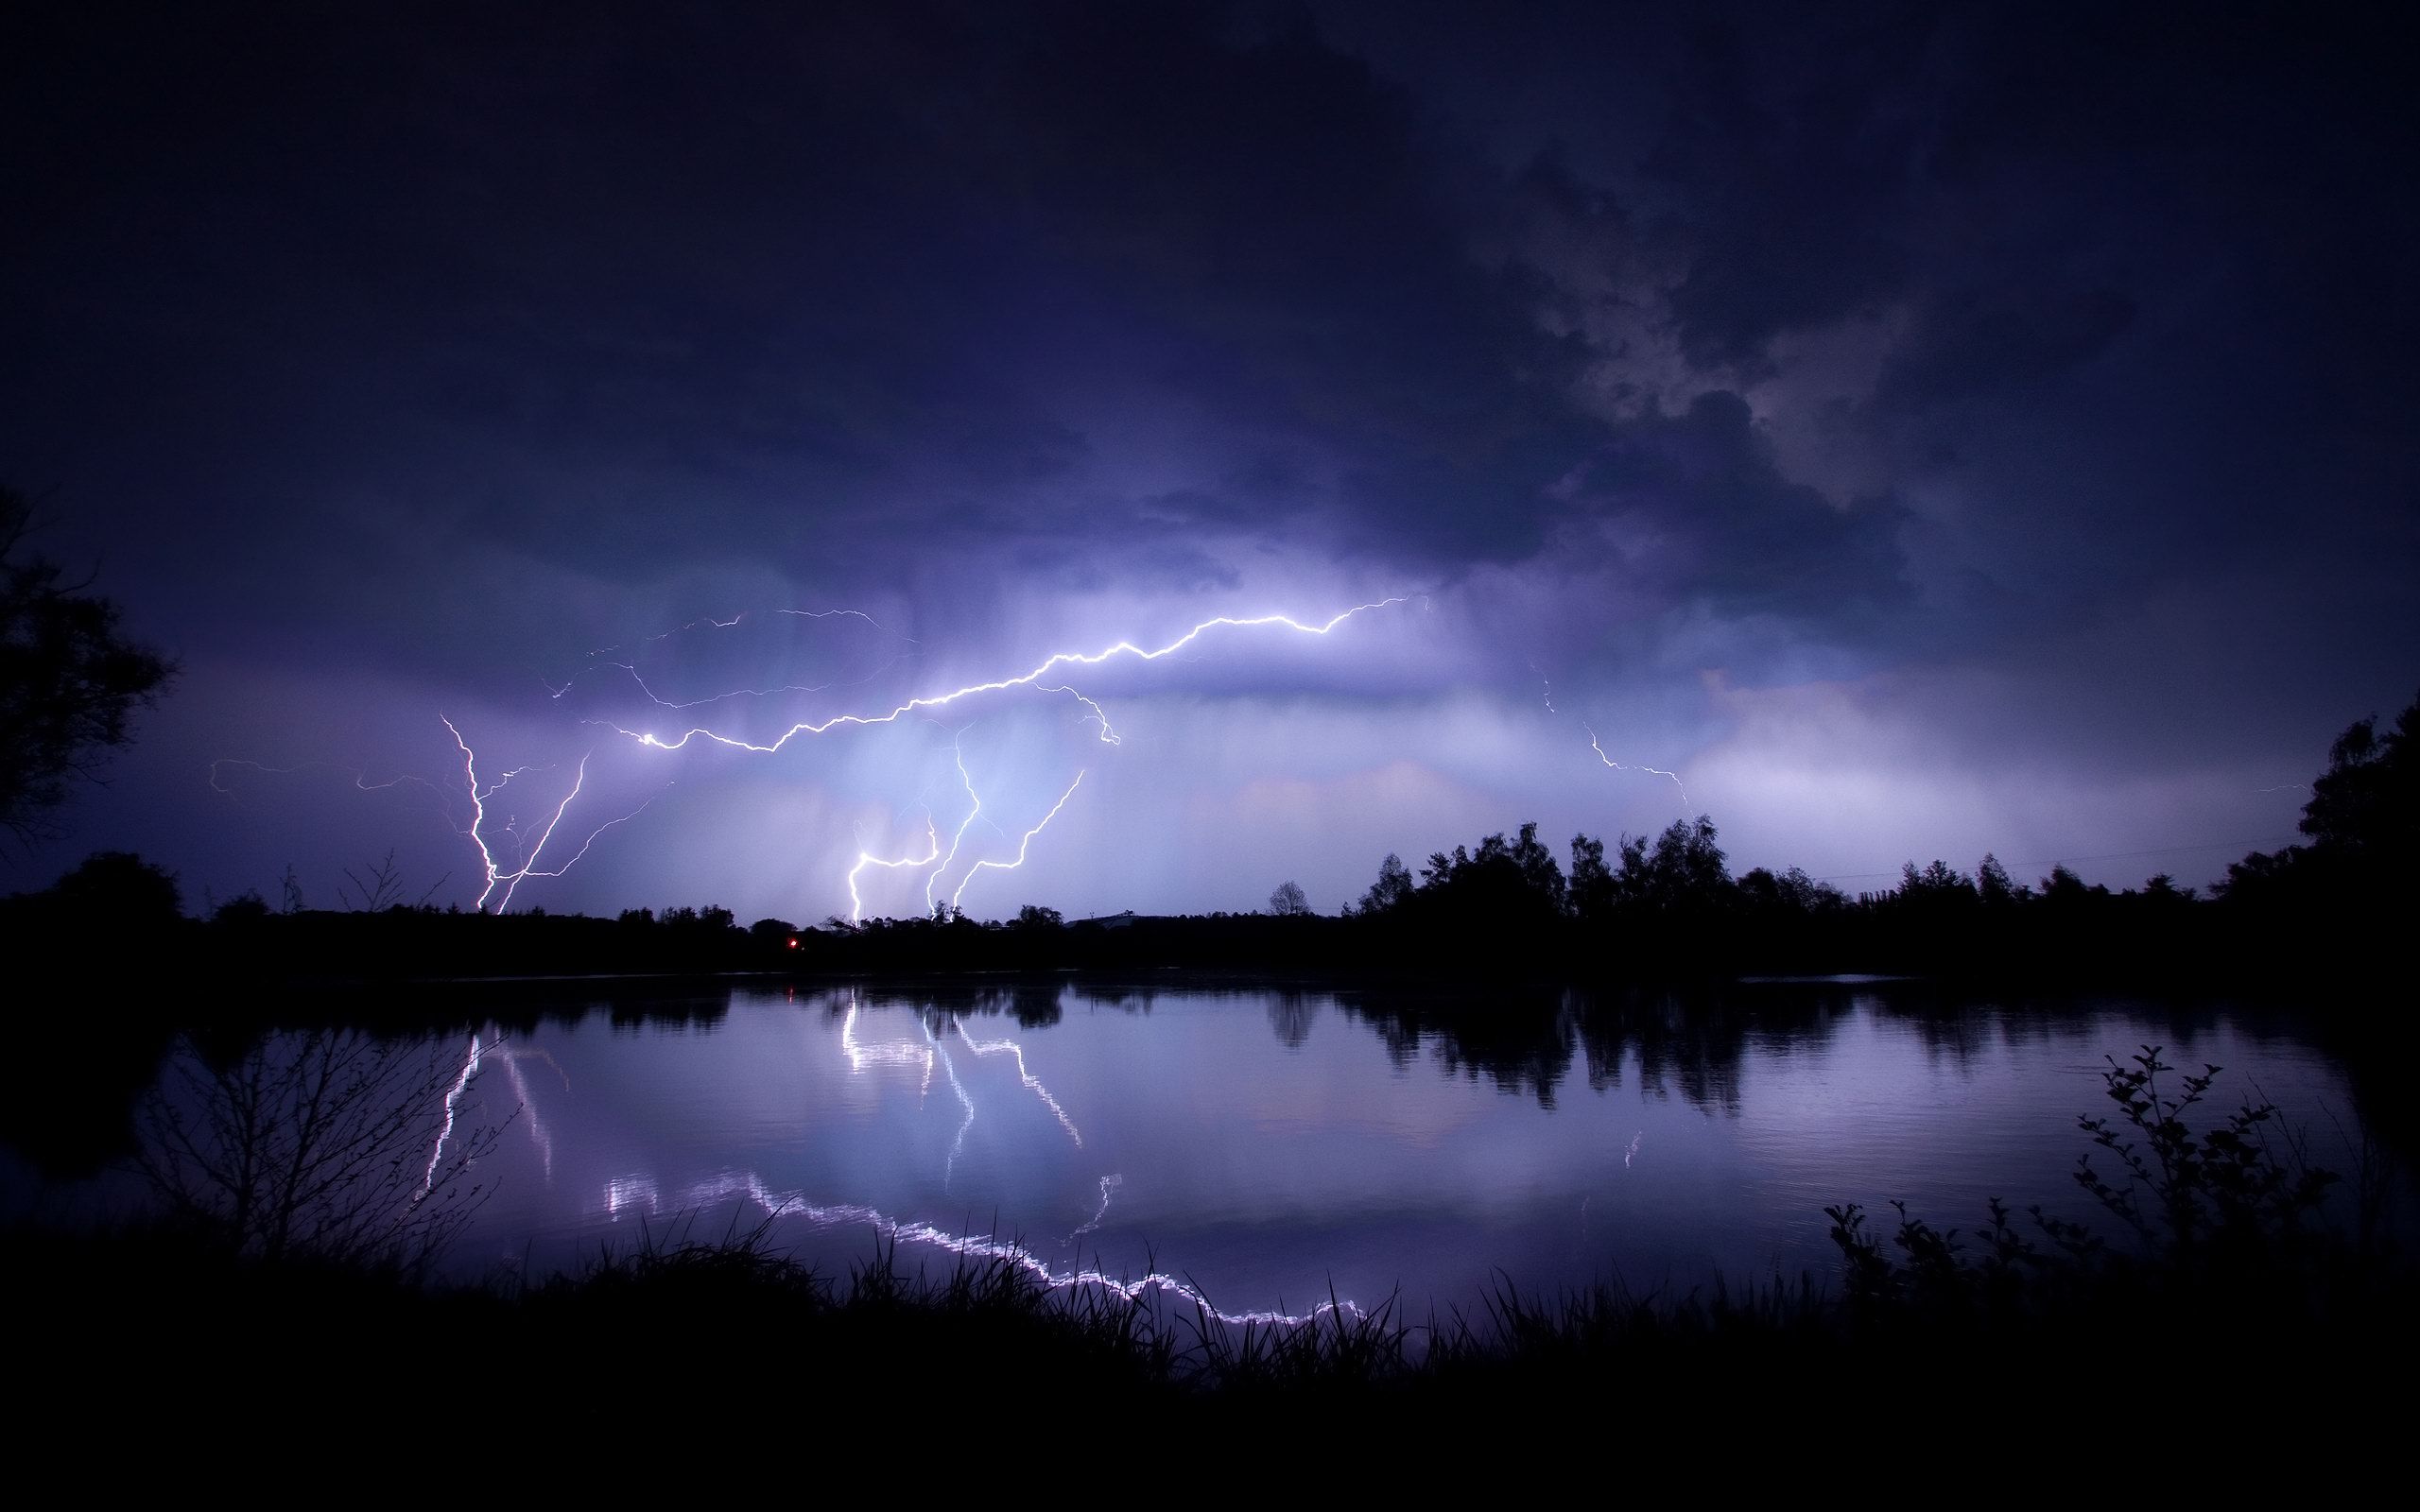 Landscapes nature trees forest lakes reflection lightning rain storm night water contrast bright light scenic wallpaperx1600